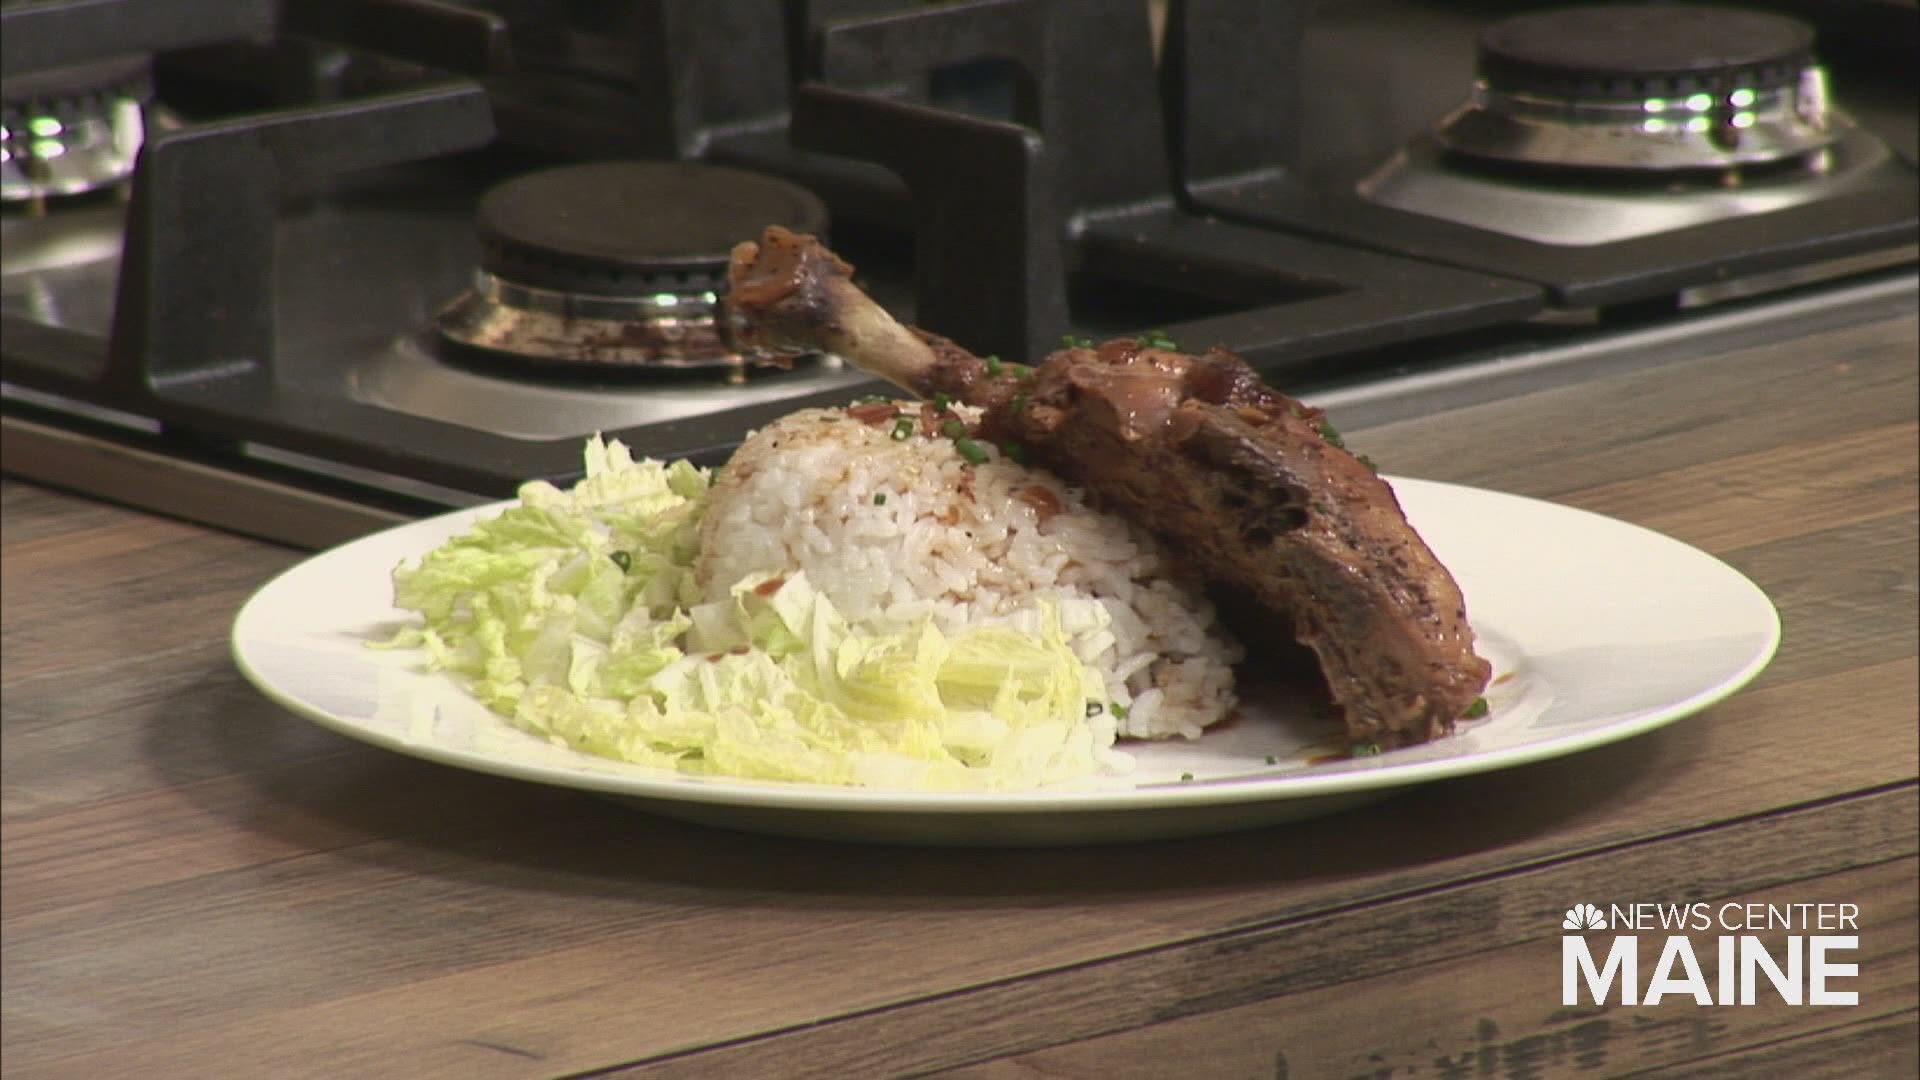 Chef Dave Mallari owns The Sinful Kitchen in Portland and The Pig Kahuna - a catering service.